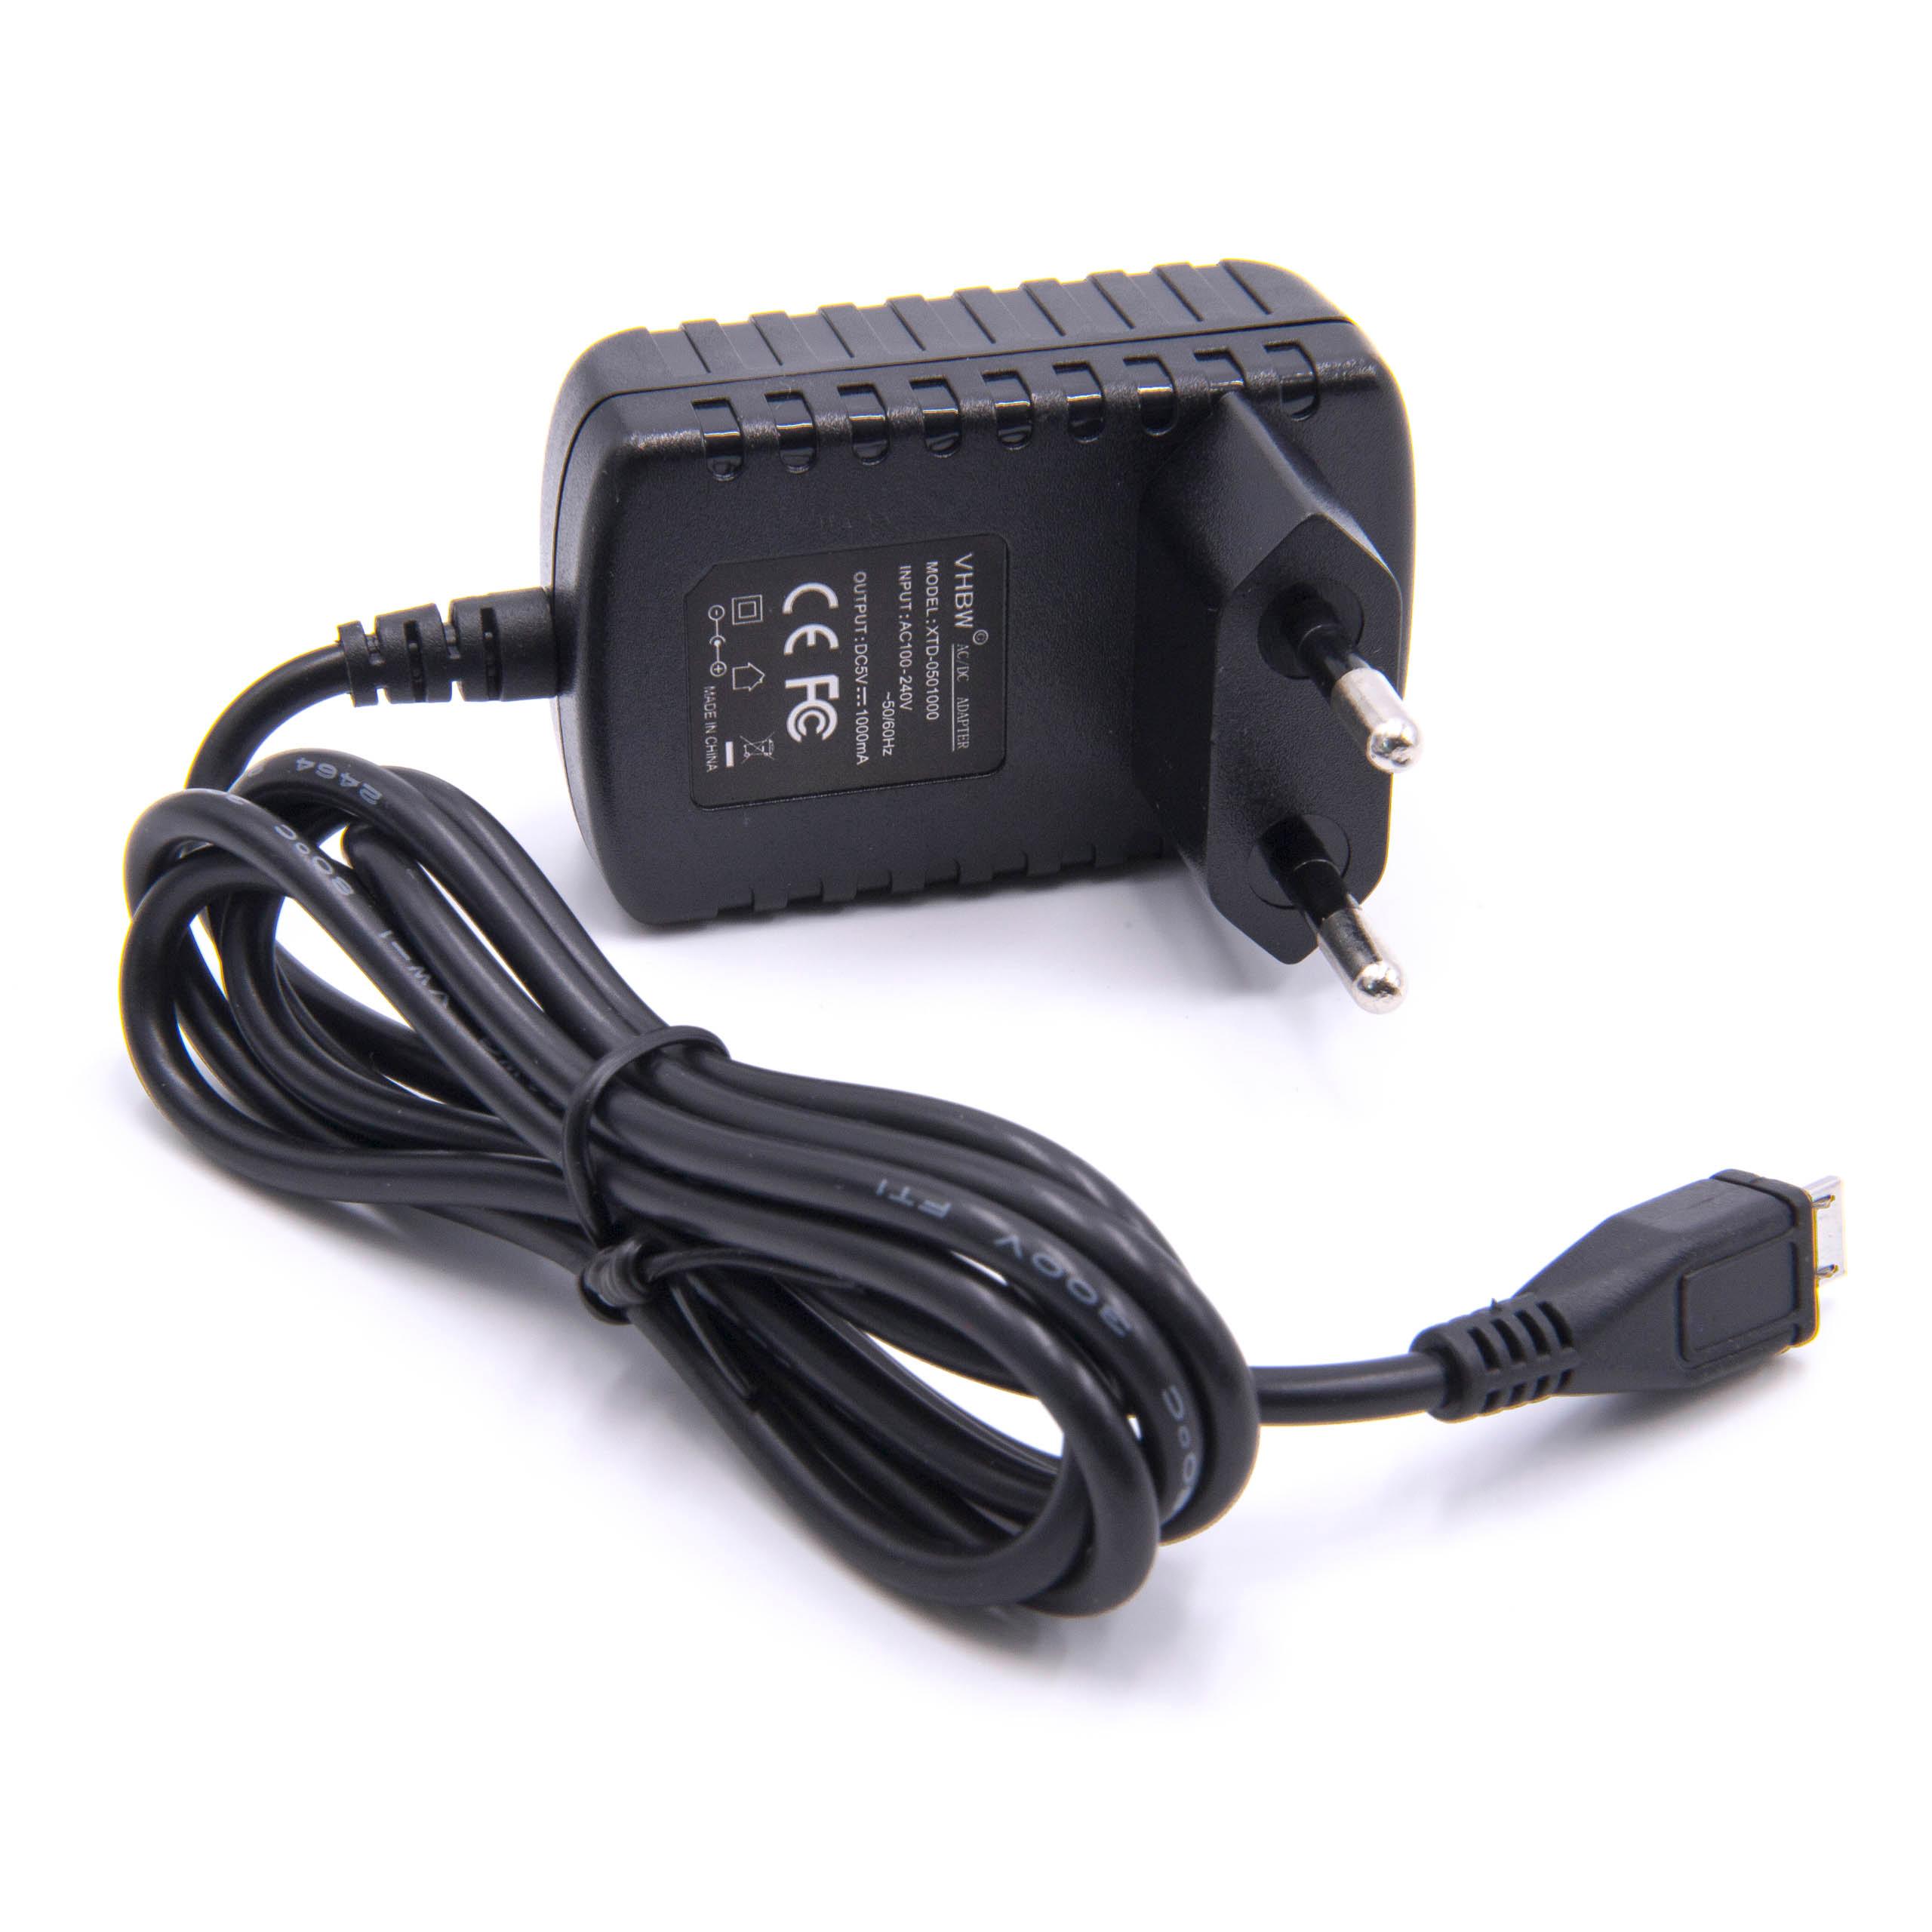 Charger 110-220 V as Replacement for Philips CP1759/01, CP1761/01, CP1484/01 for Mobile Phone - Micro USB